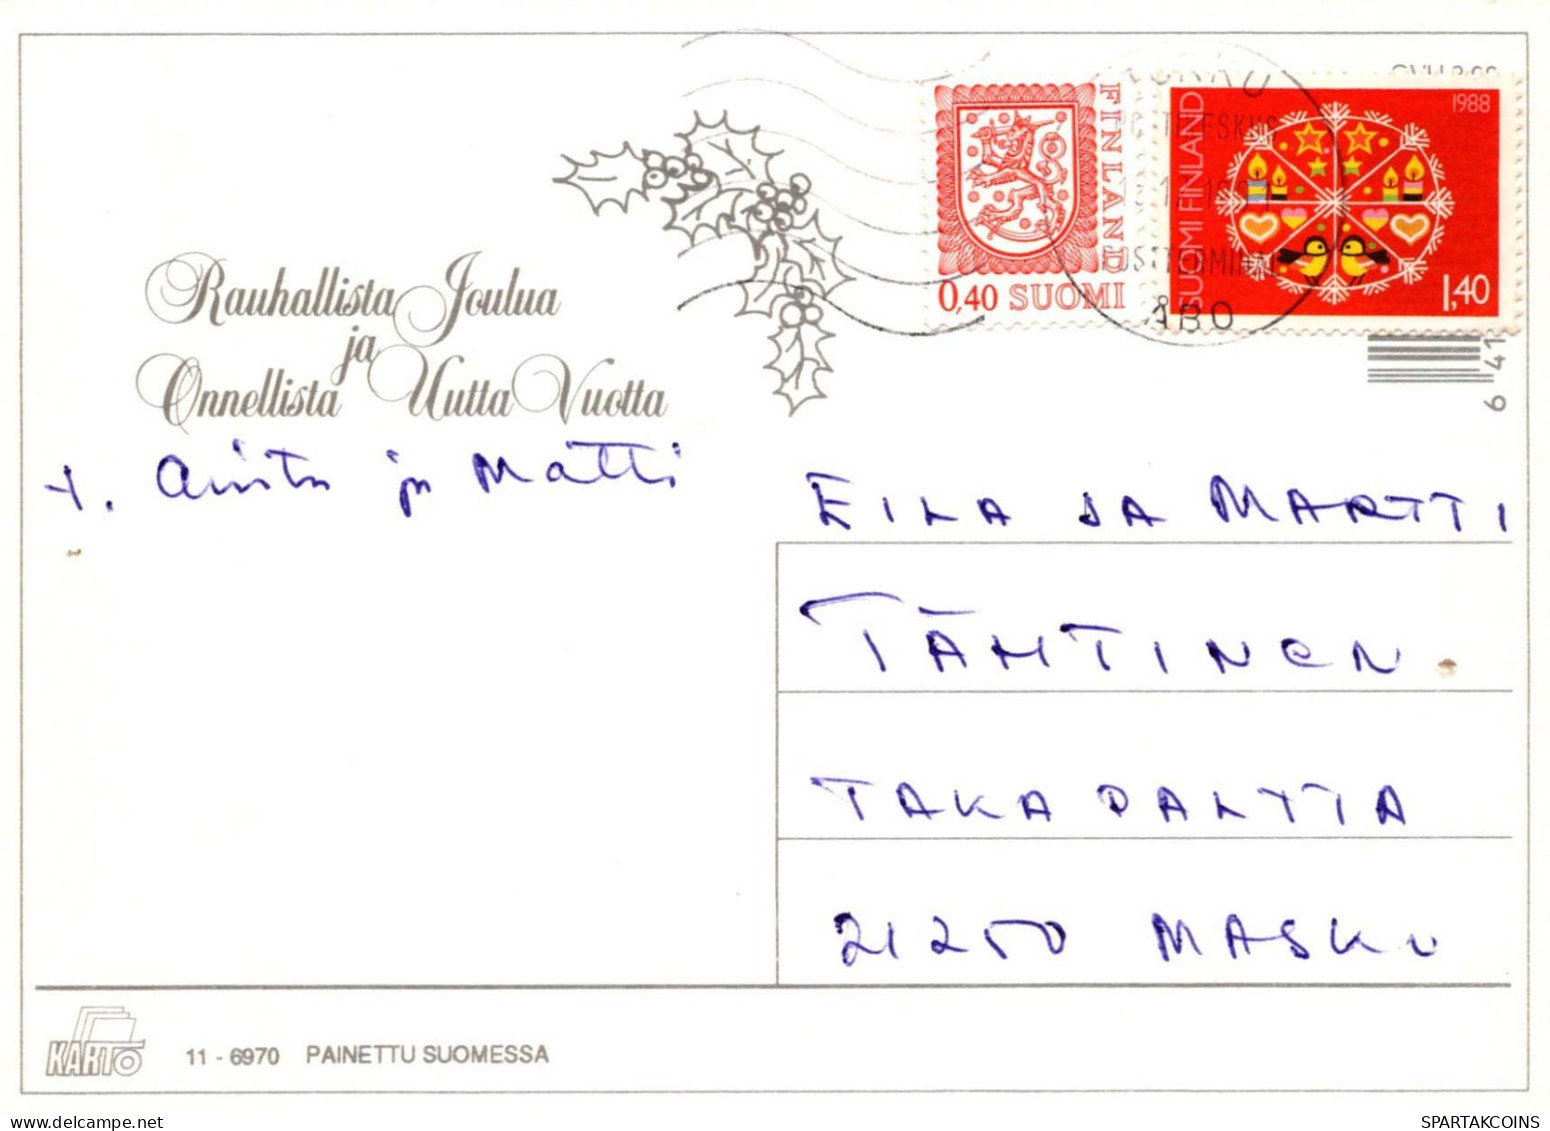 Buon Anno Natale Vintage Cartolina CPSM #PAT384.IT - New Year